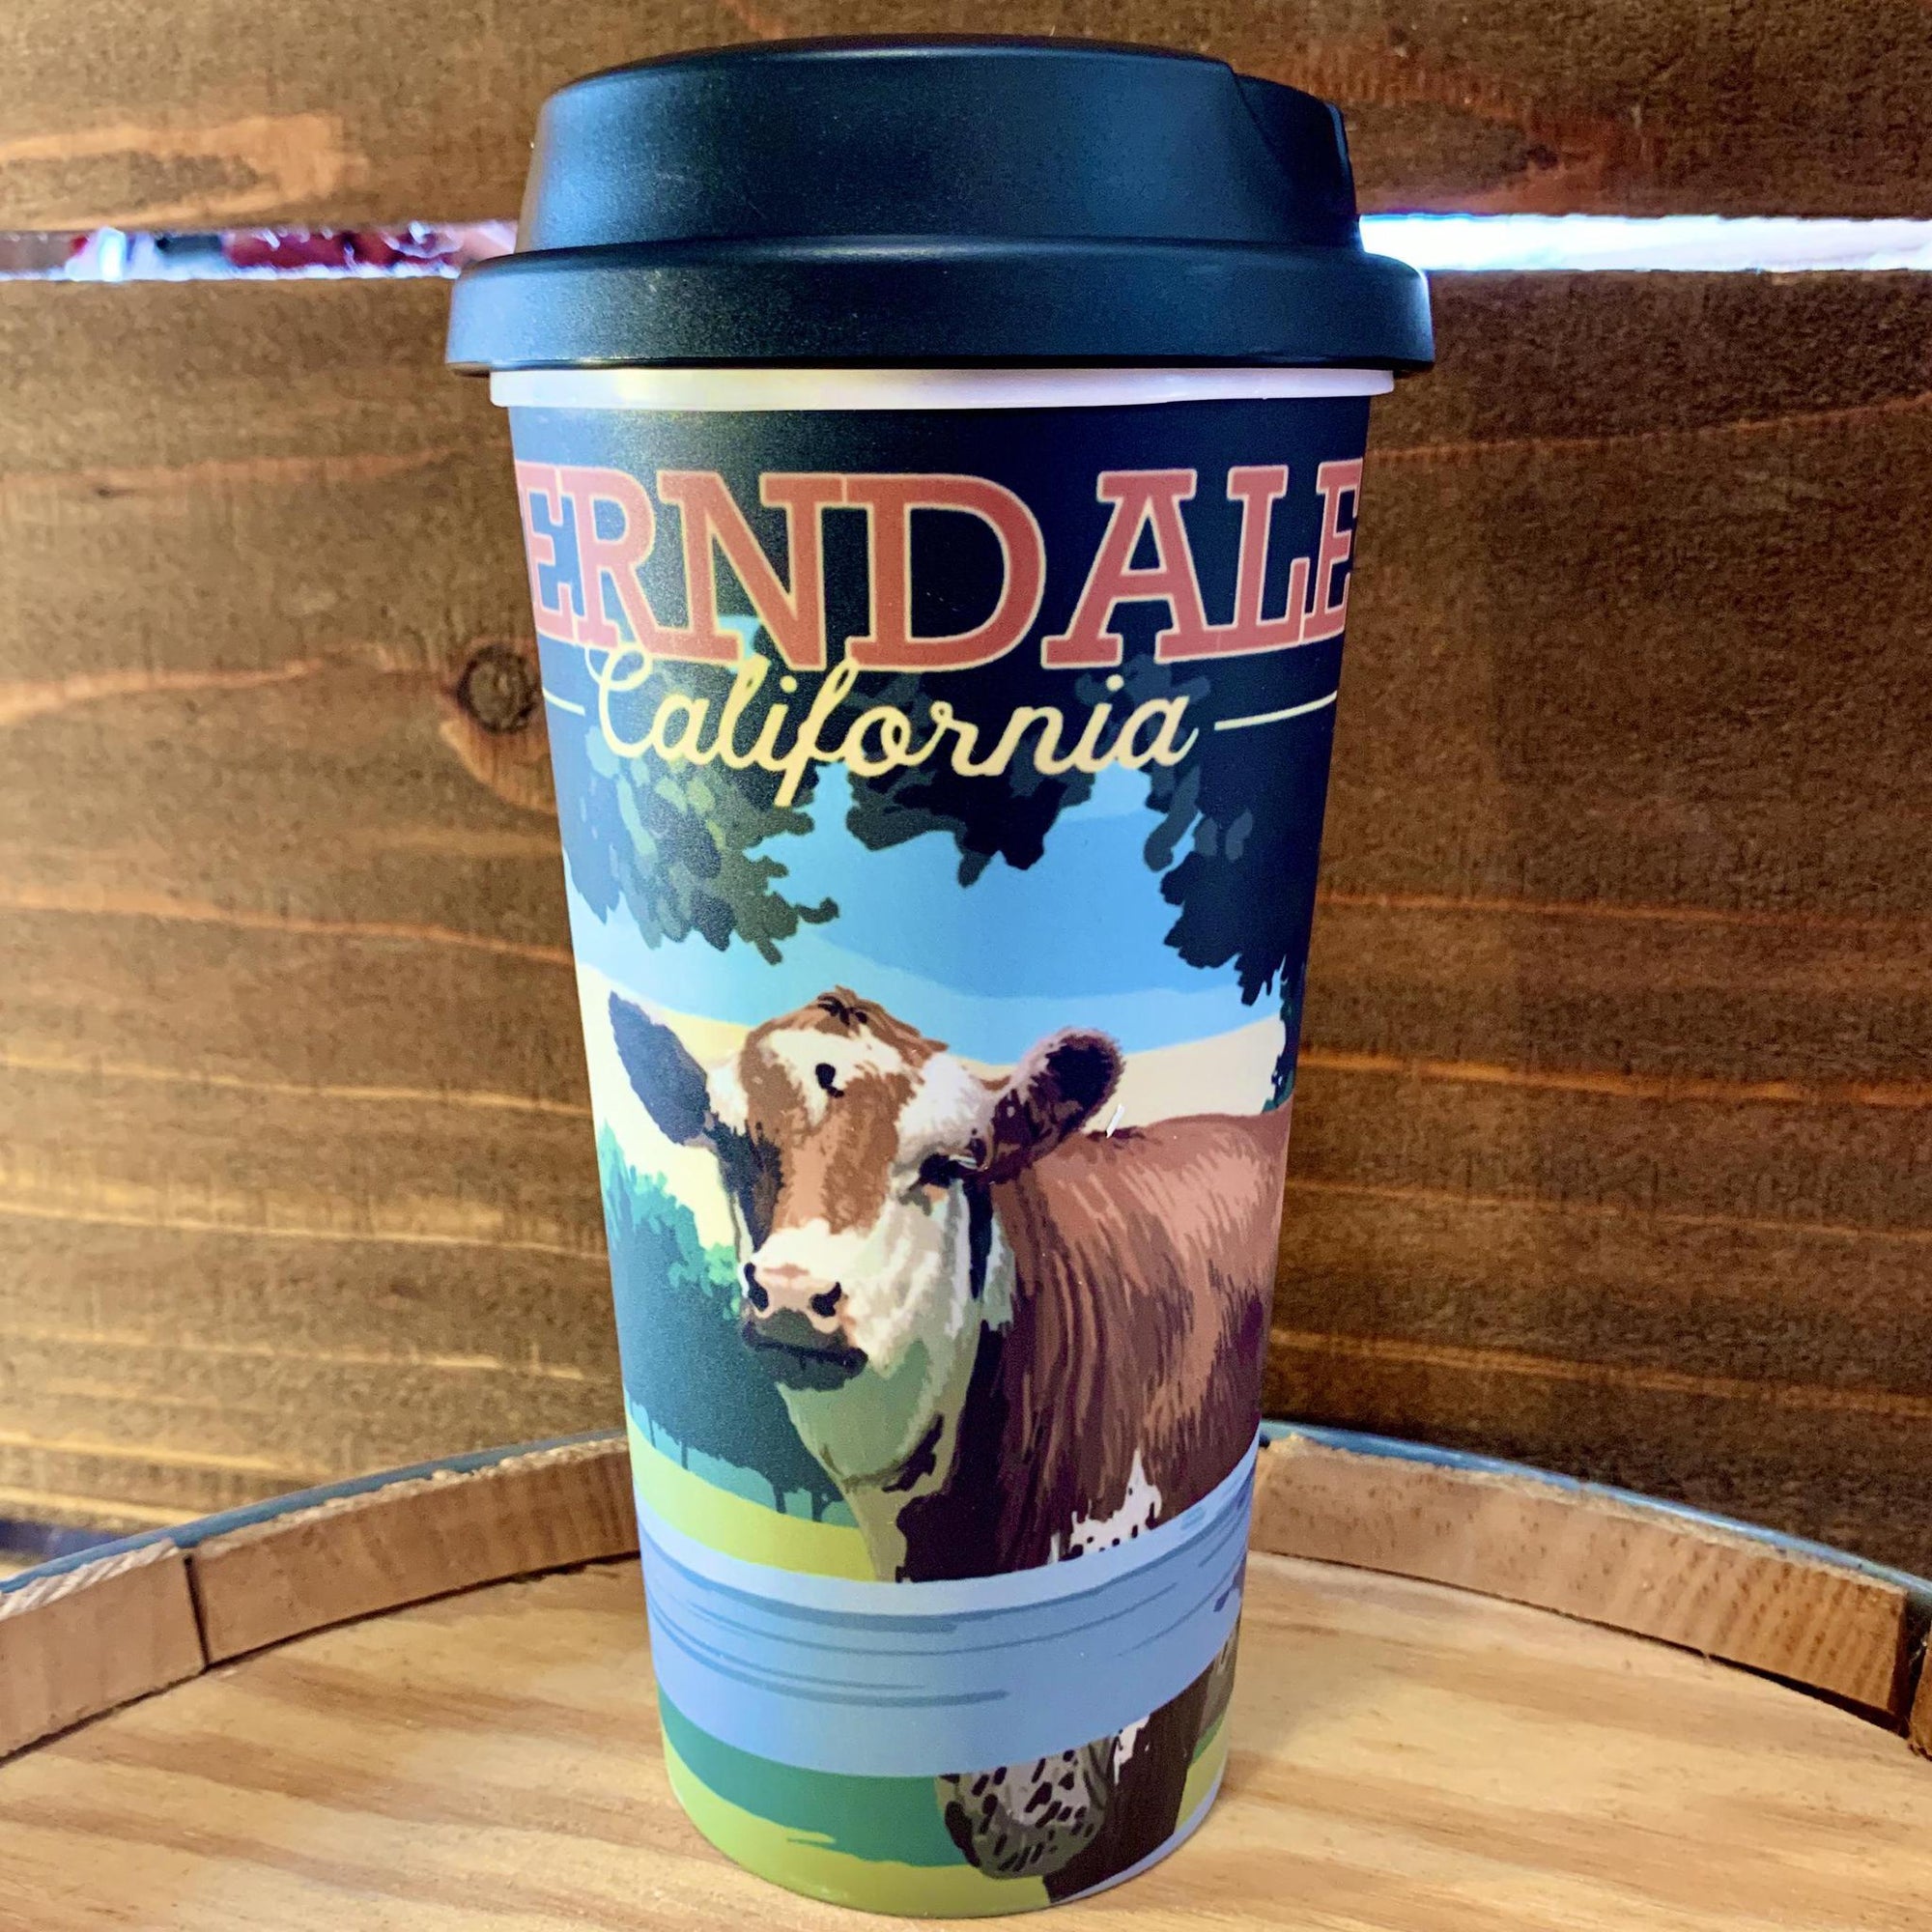 20oz Poly Tumbler with Black Lid Ferndale California - Cow in Pasture - 2020 Limited Edition Design